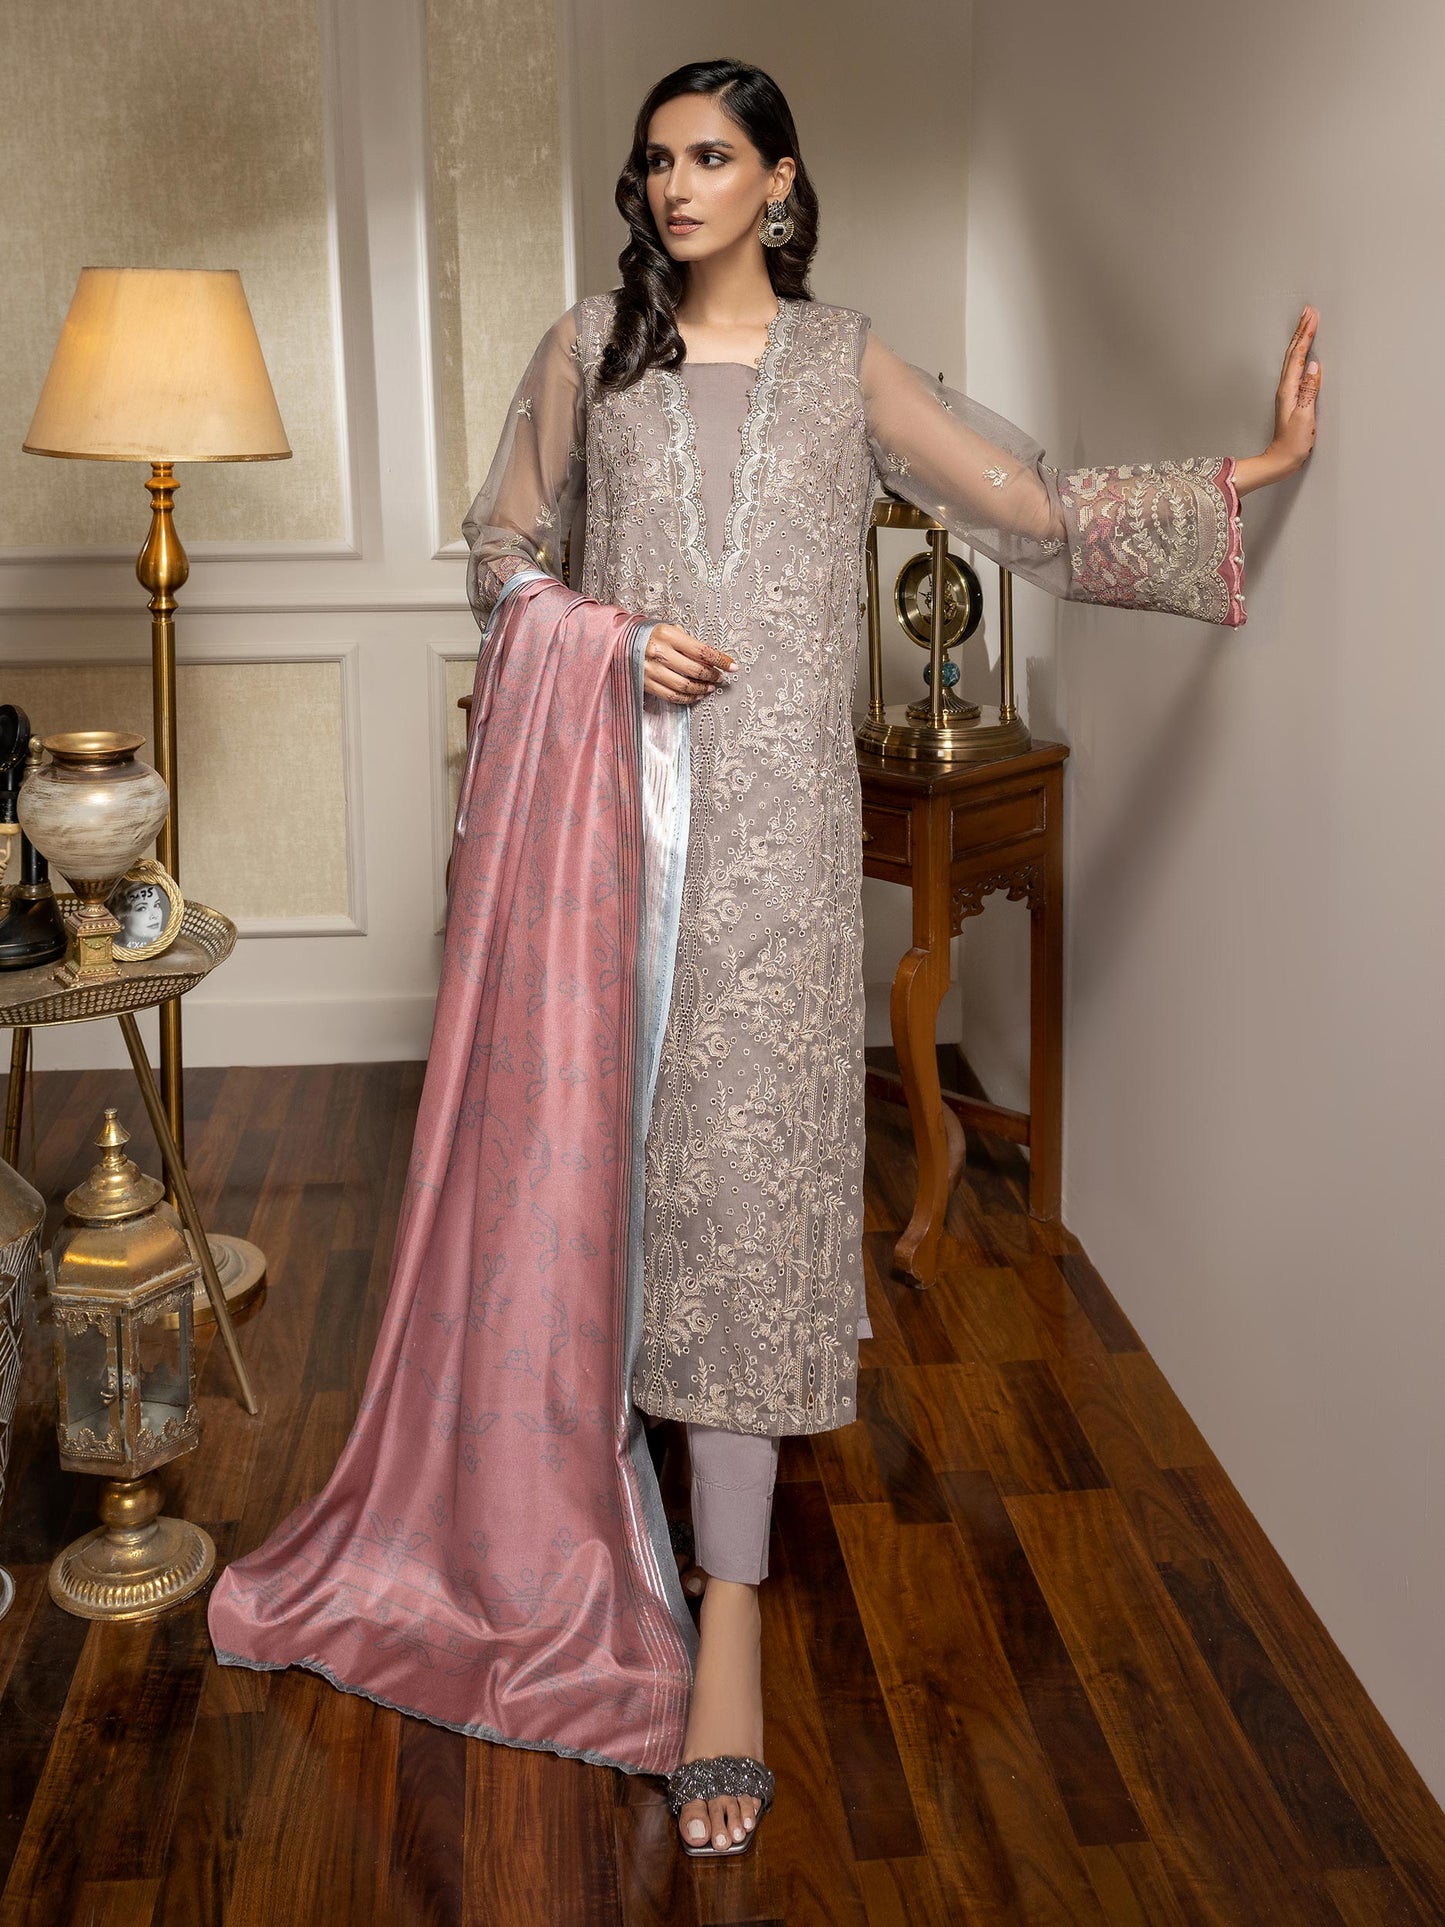 3 Piece Organza Suit-Embroidered (Unstitched)